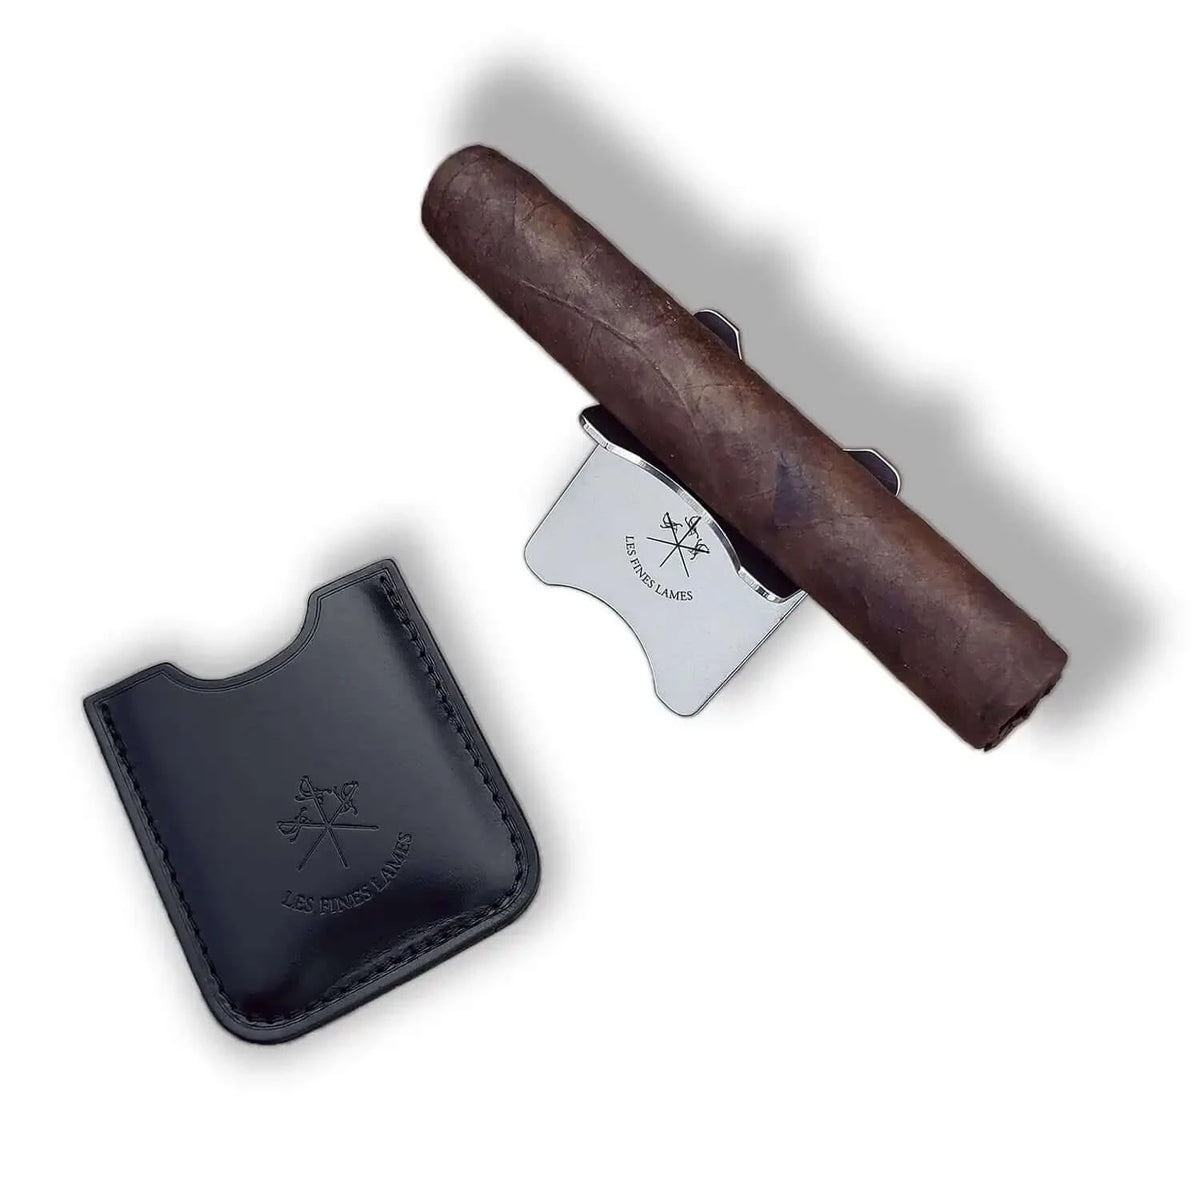 LE PETIT by LES FINES LAMES - Skylines - New York Cigar cutter